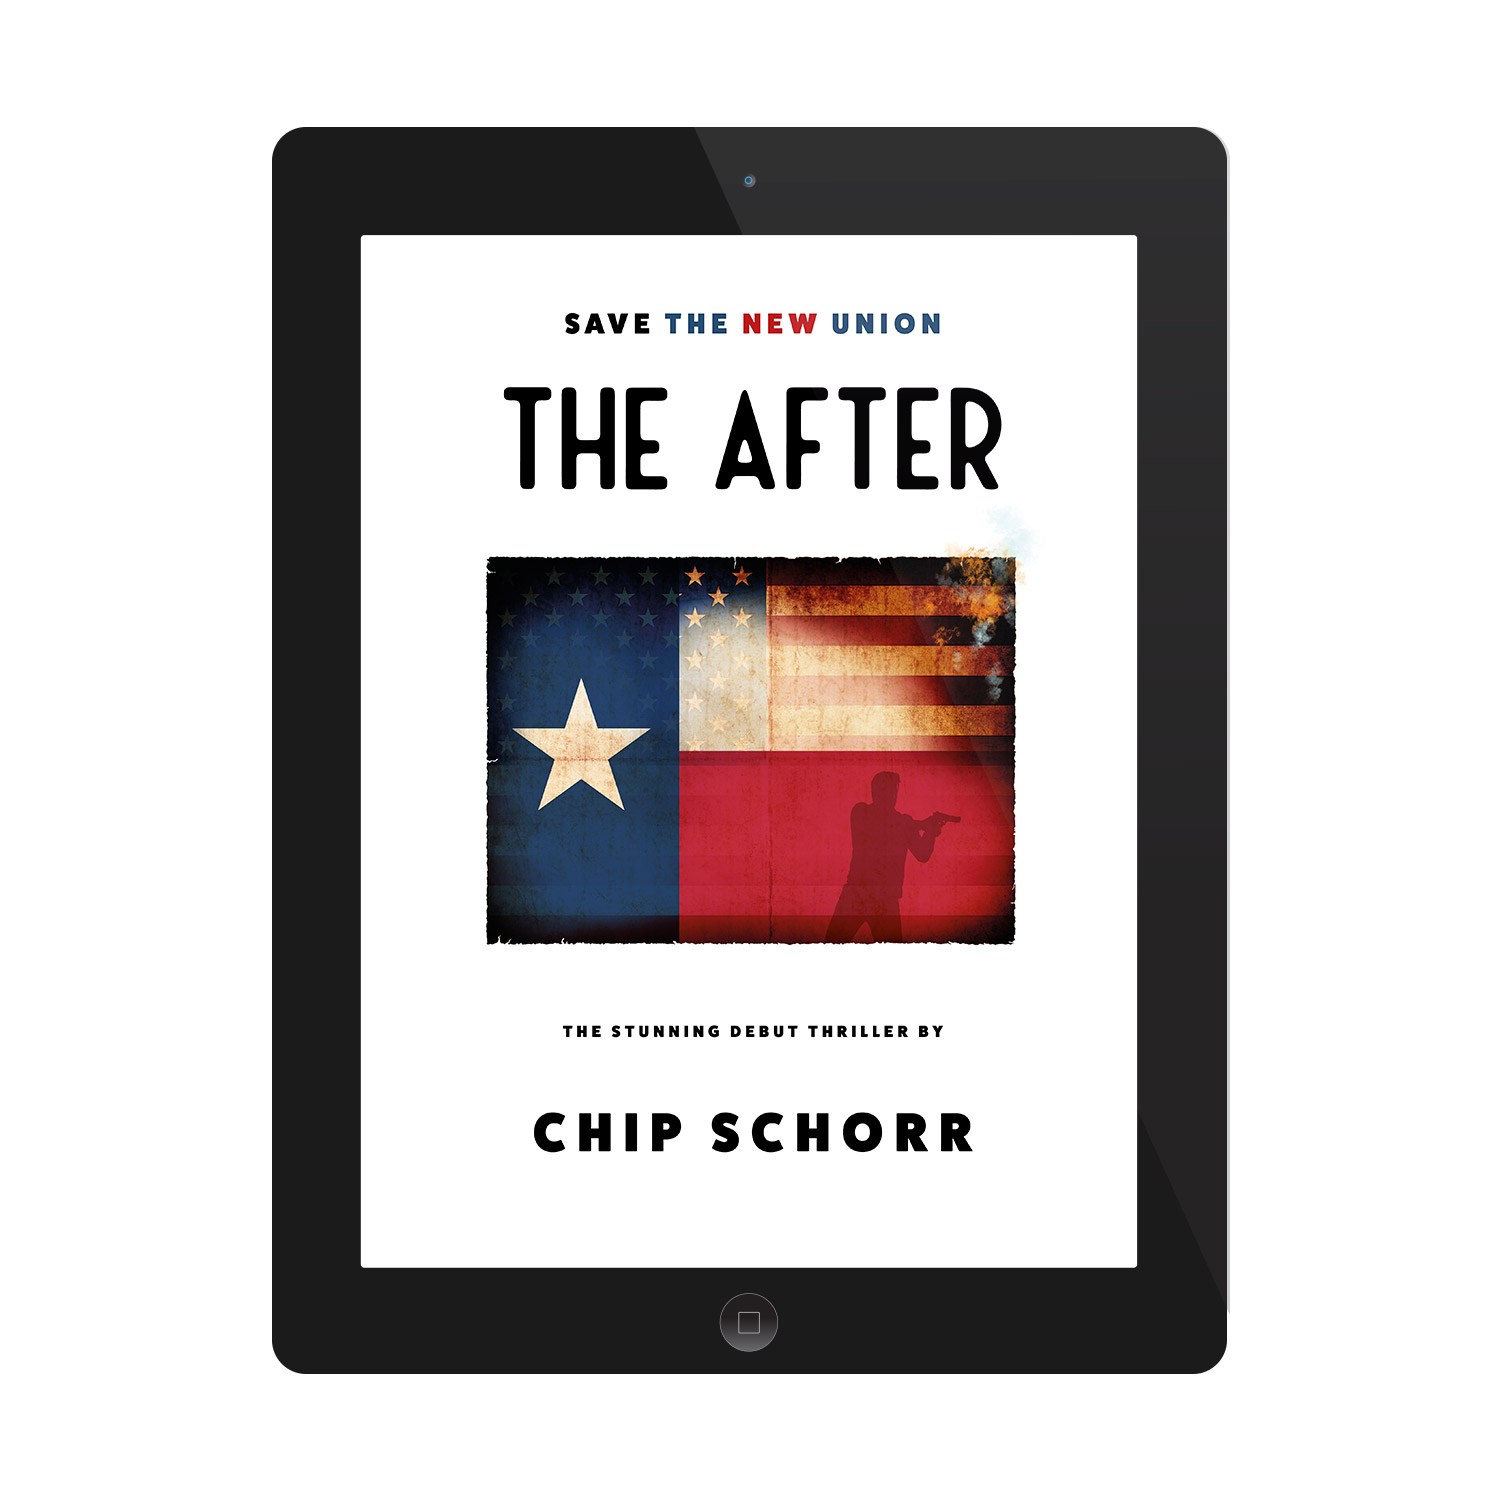 'The After' is a breakneck conspiracy thriller novel by author Chip Schorr. The book cover and interior were designed by Mark Thomas, of coverness.com. To find out more about my book design services, please visit www.coverness.com